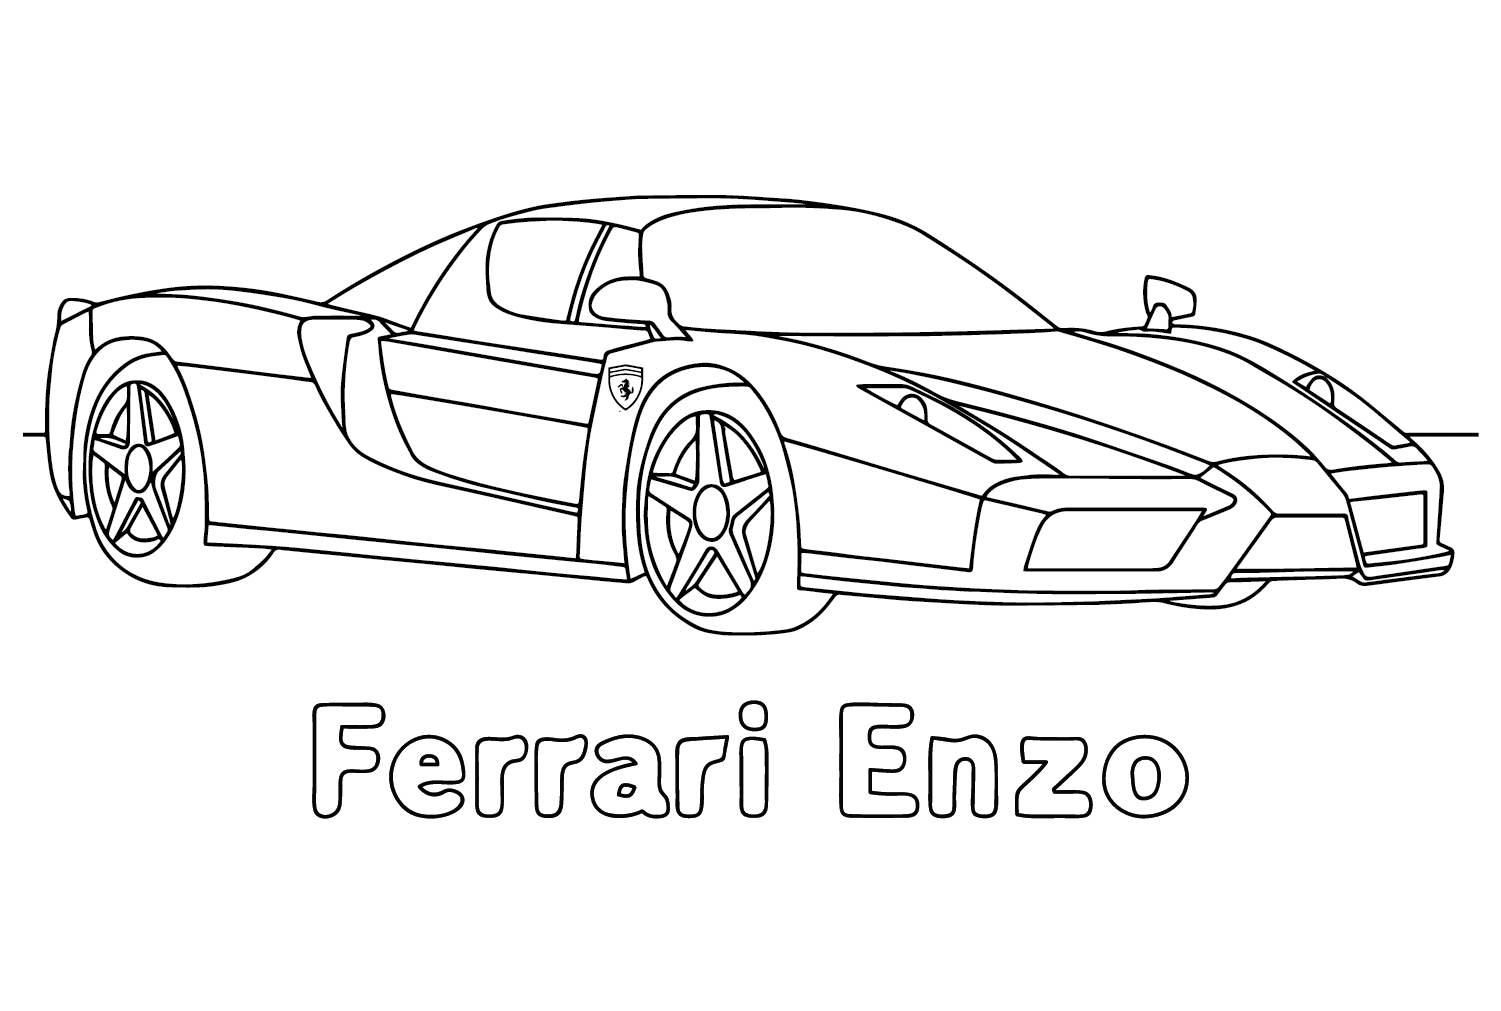 Cars Coloring Page Ferrari Laferrari F150 - Free Printable Coloring Pages